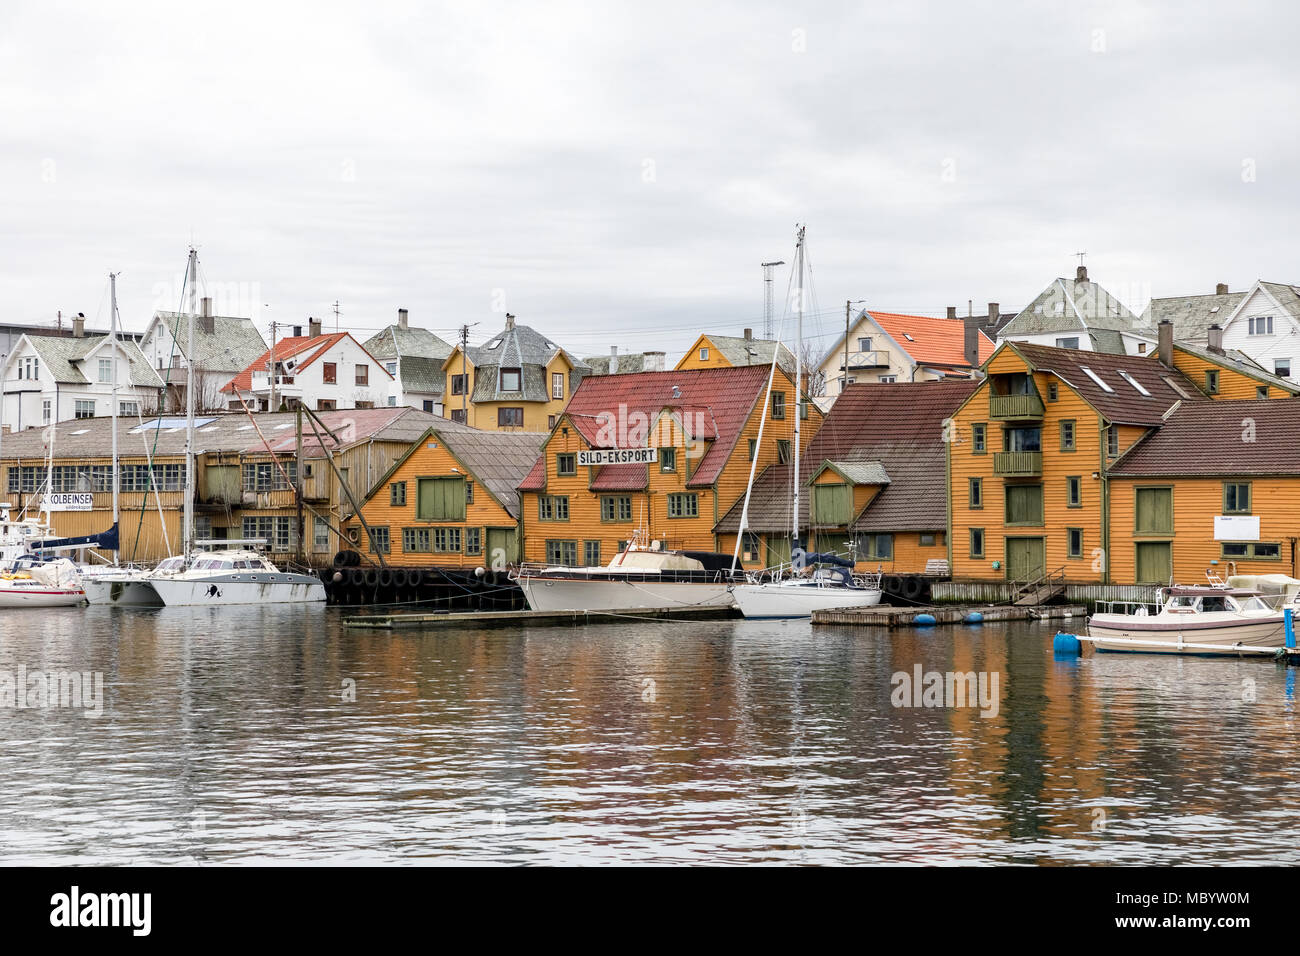 Haugesund, Norway - January 9, 2018: Old wooden houses on the island Risoy, boats and fishing industry buildings. Sild-eksport meaning Herring-export in norwegian. Stock Photo